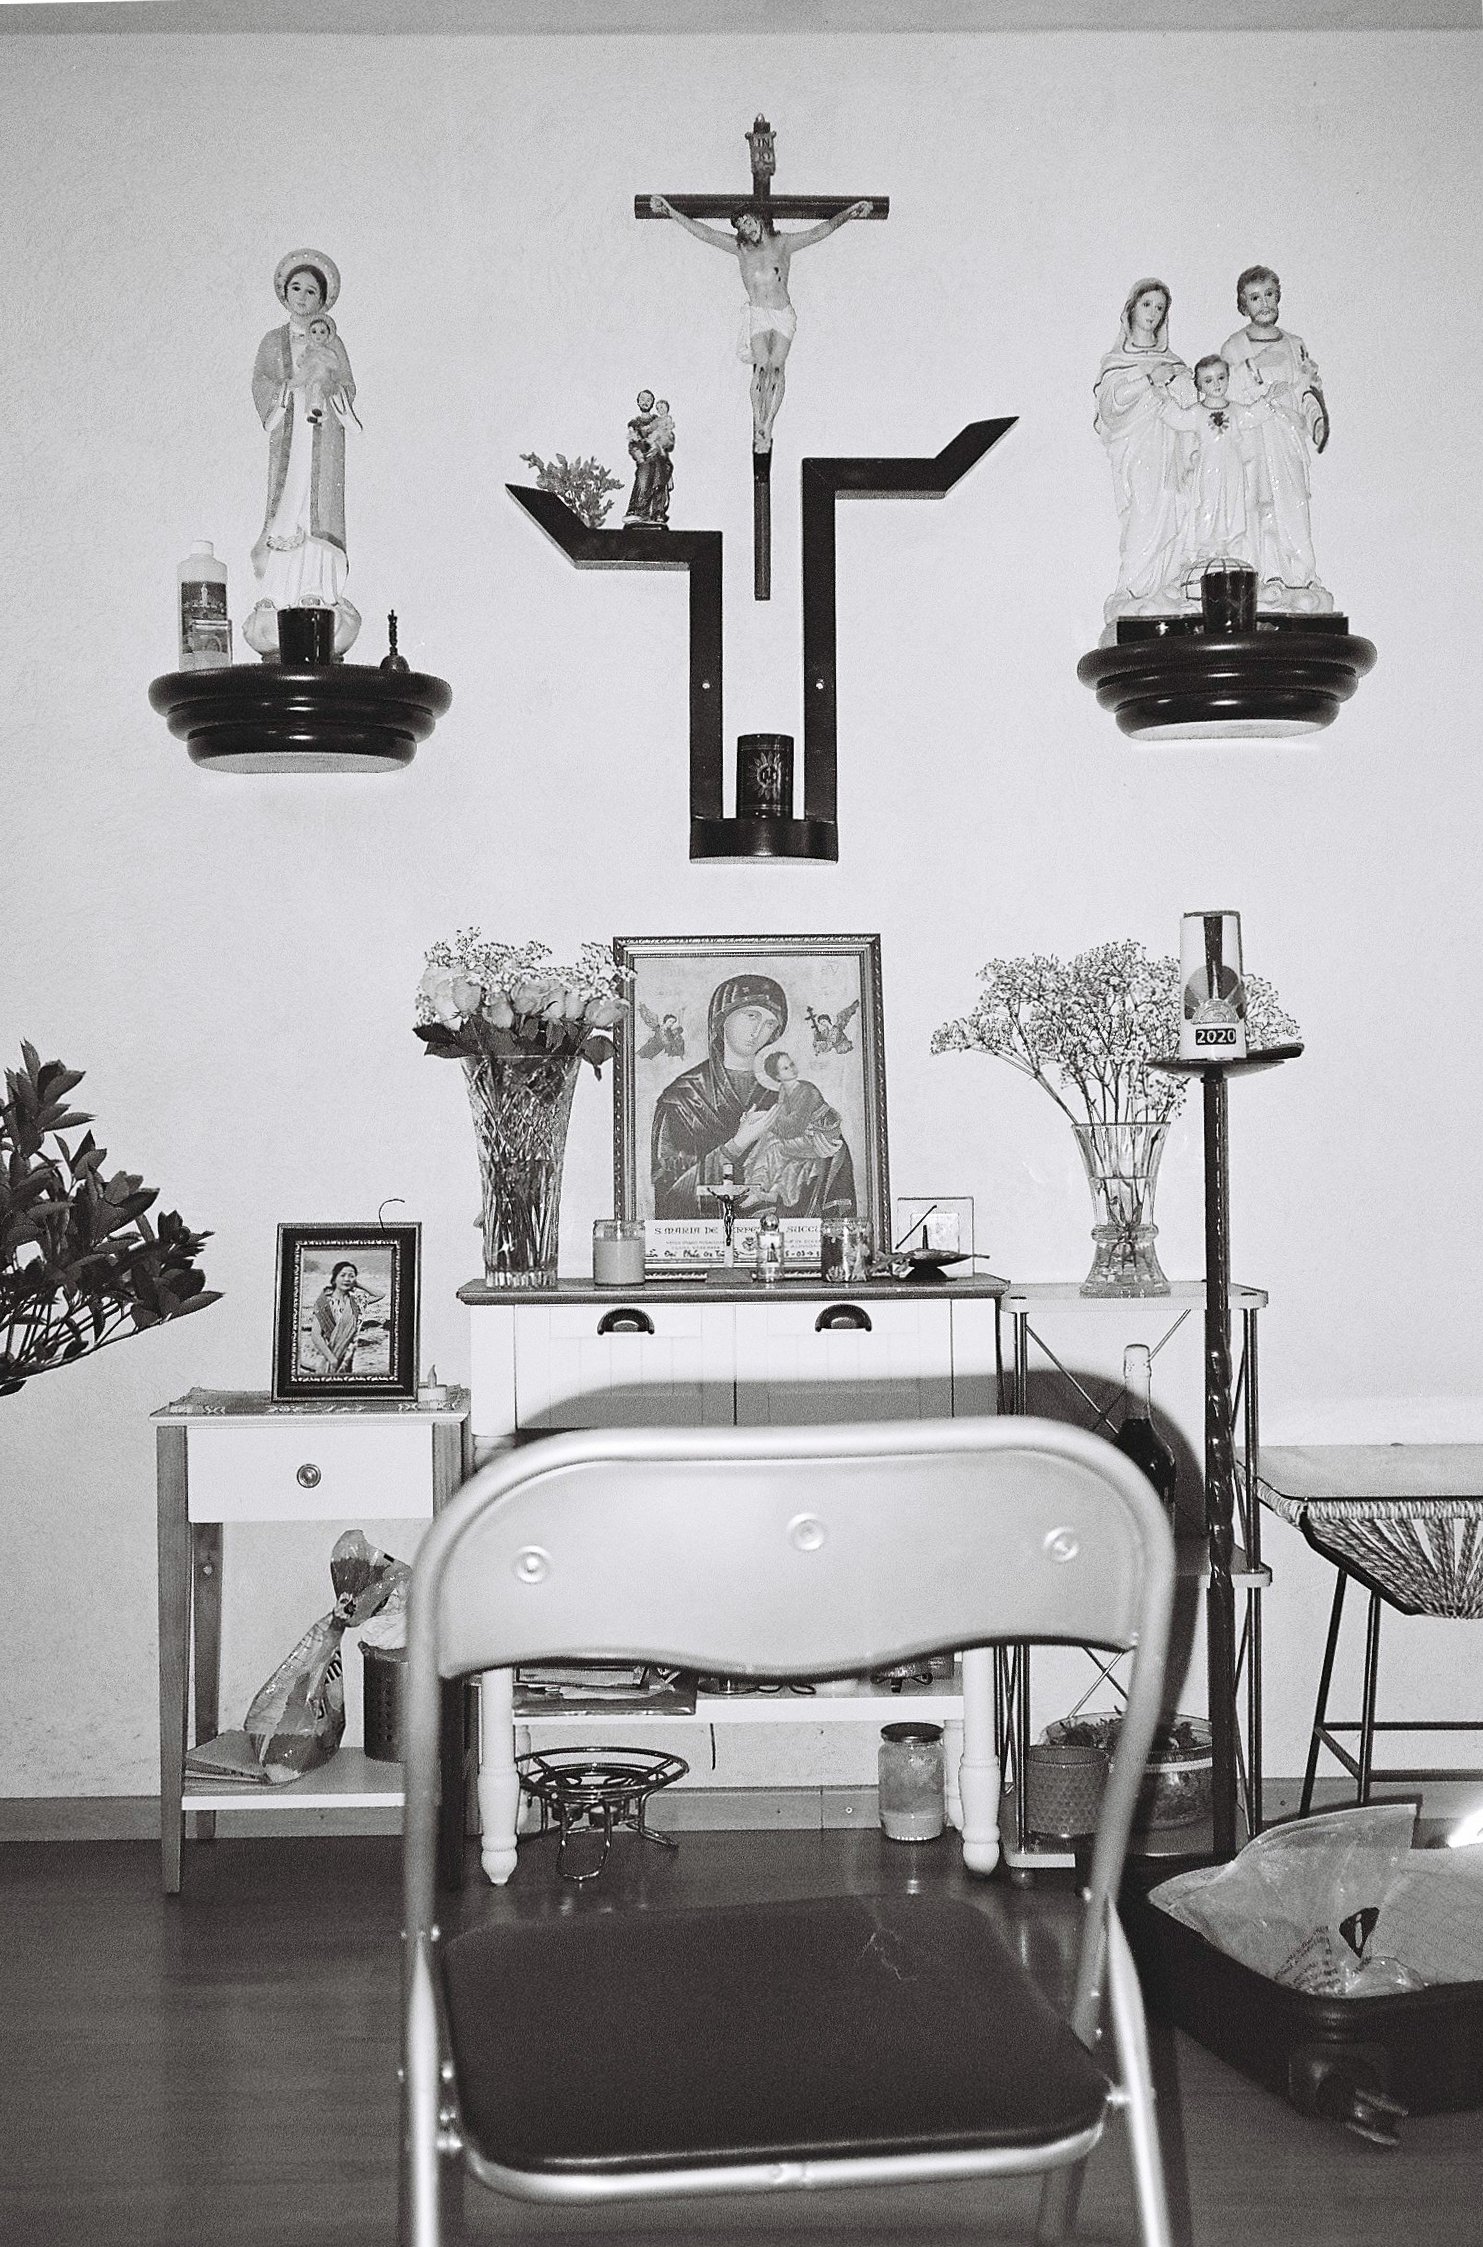 Christian symbols, statues and pictures on a wall with a chair standing in front of it.